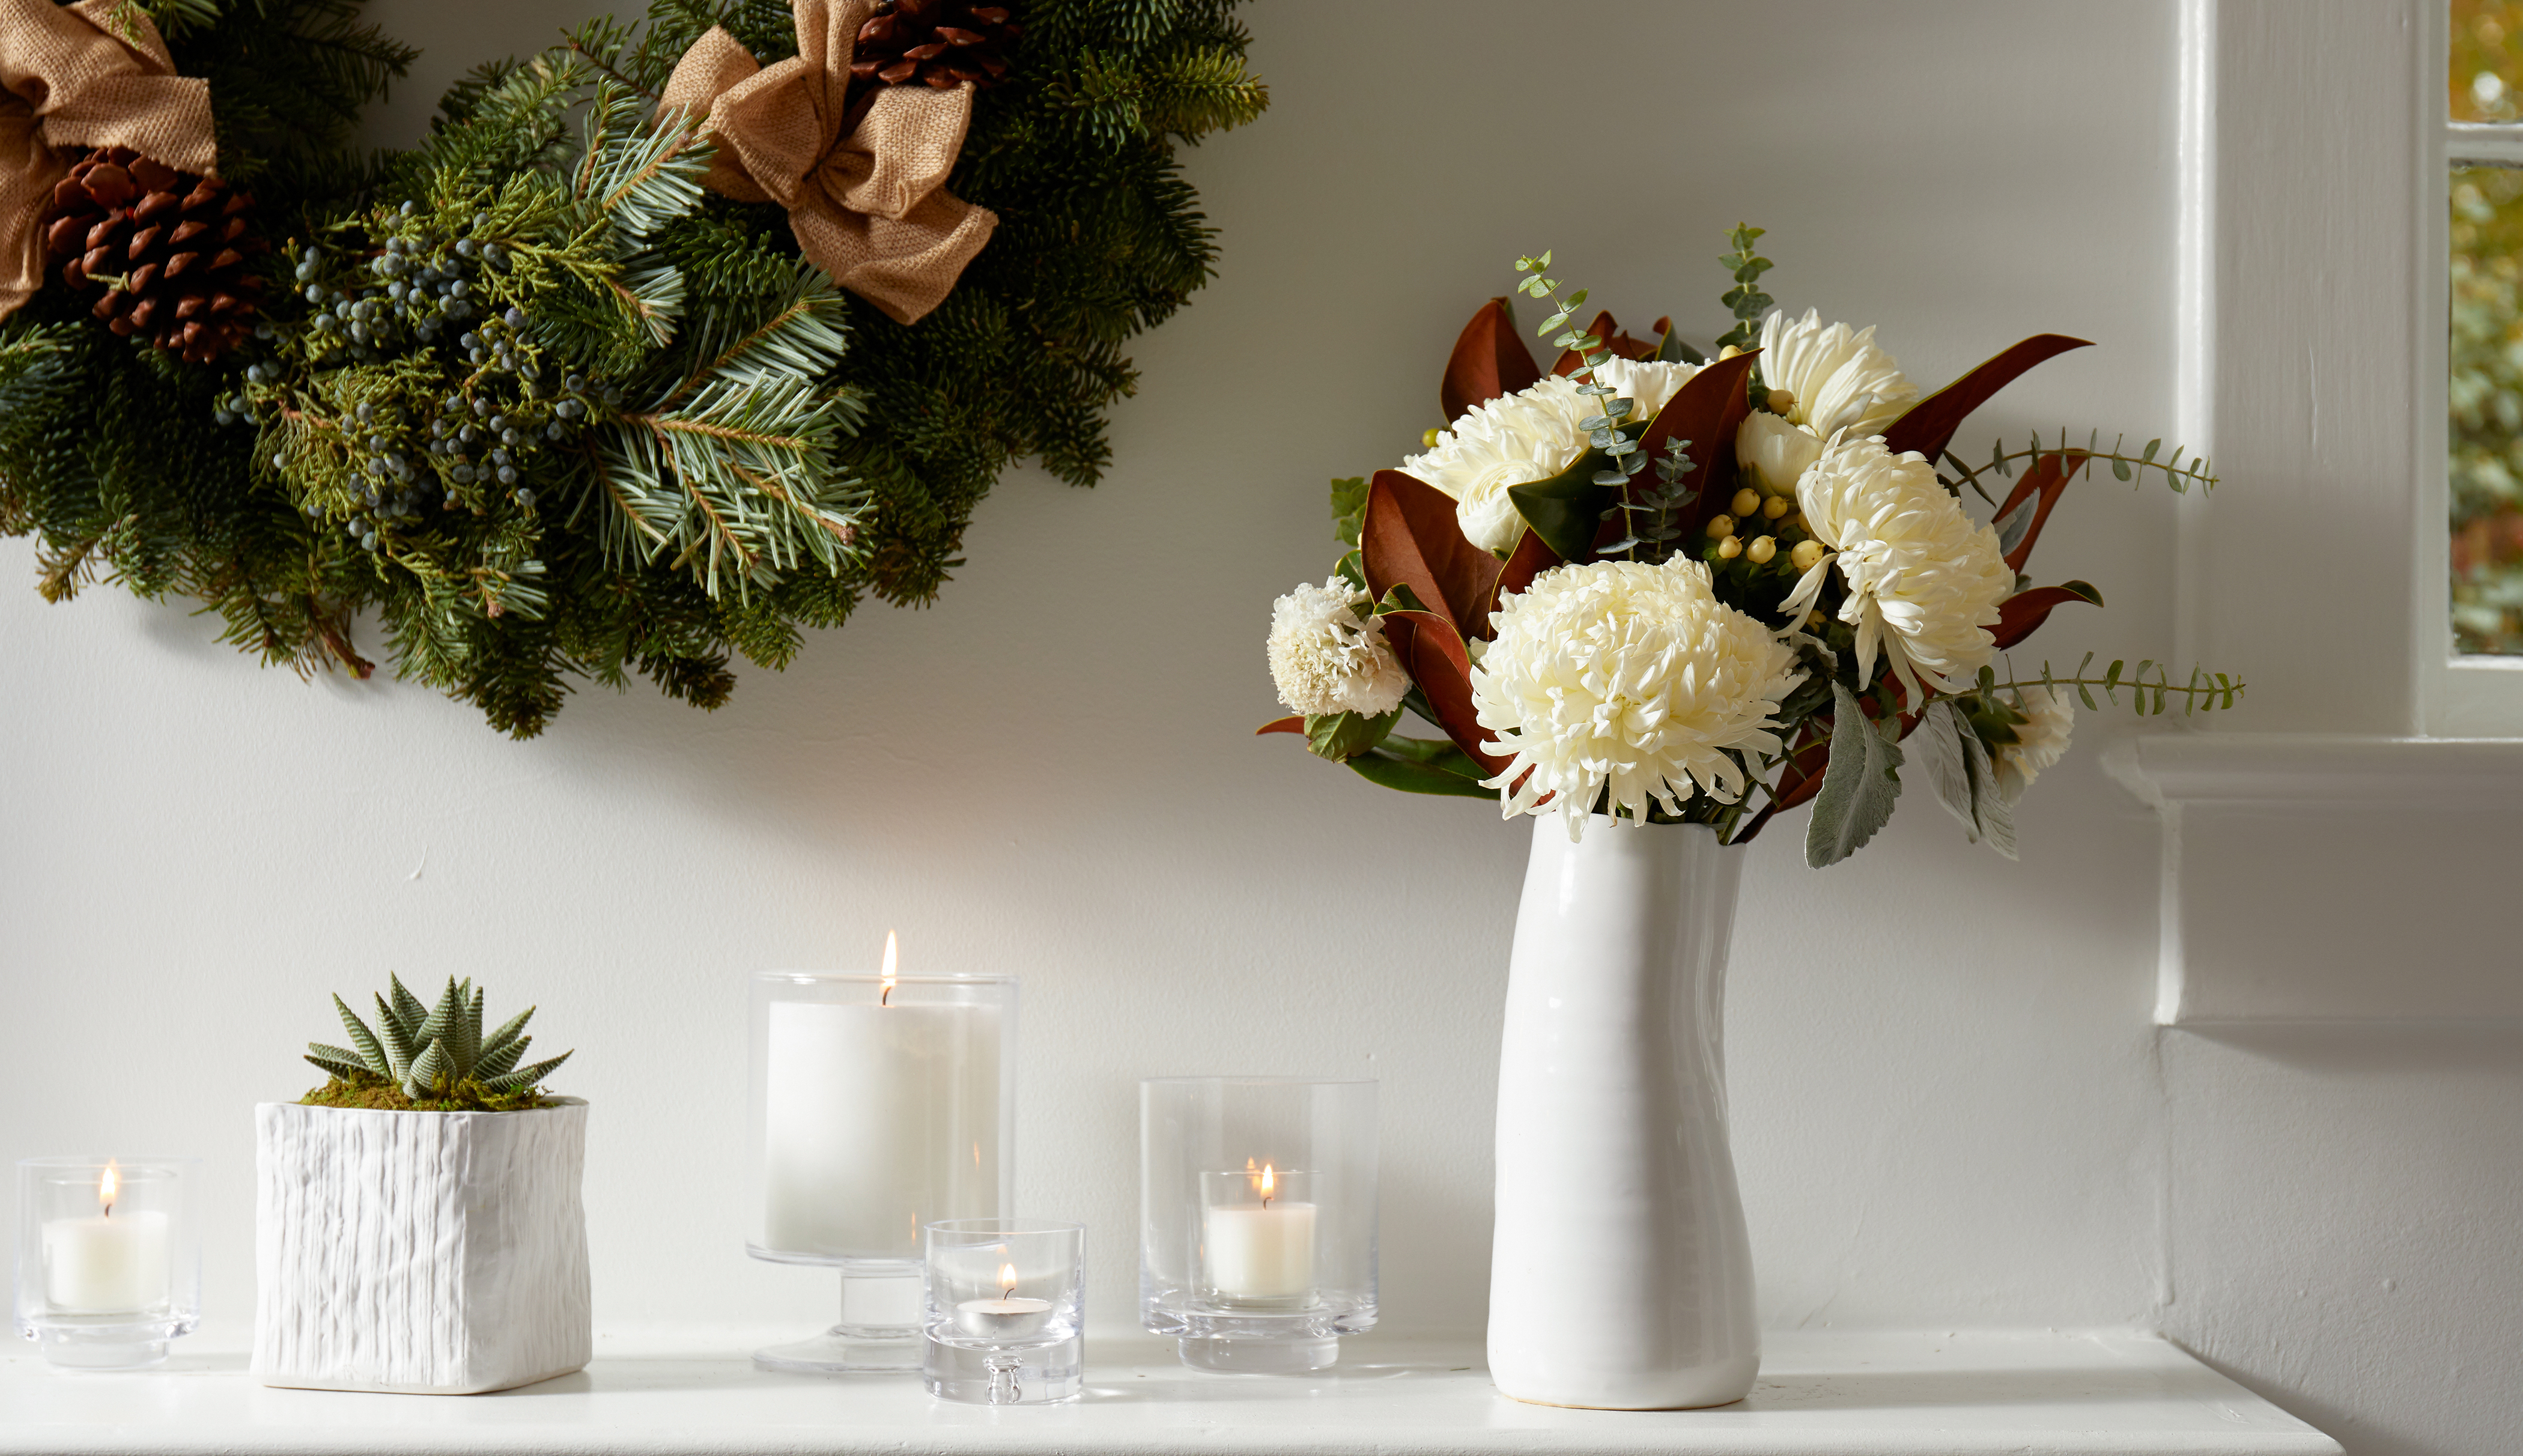 holiday mantle with seasonal wreath and bouquet with magnolia leaves